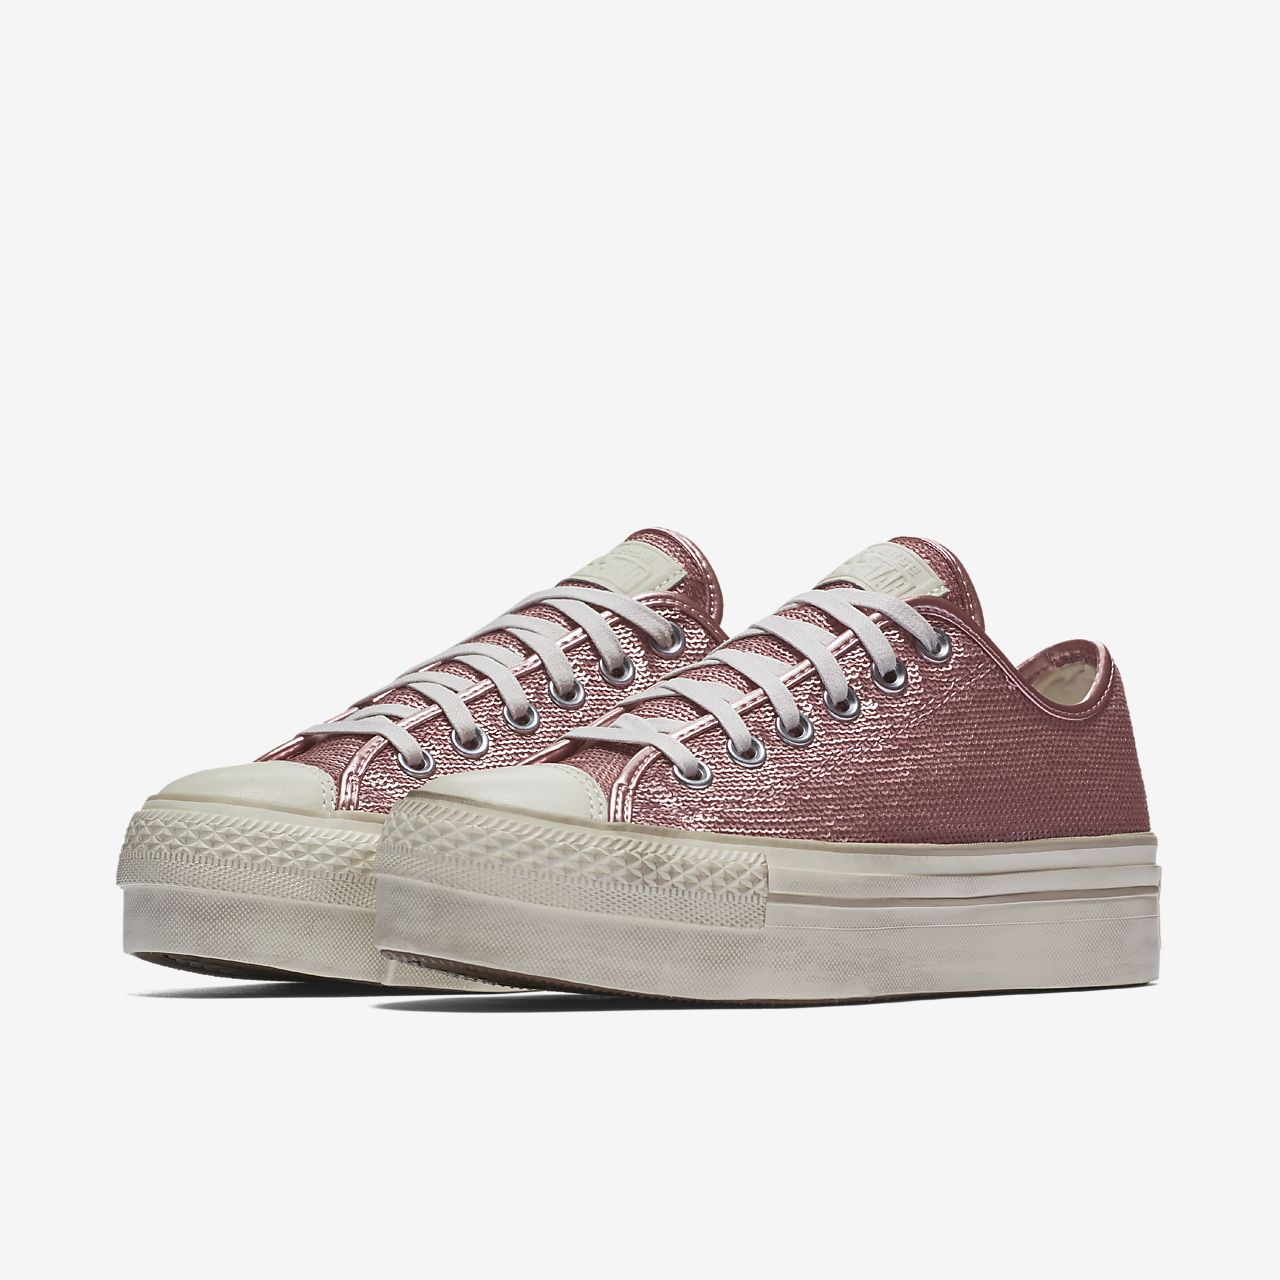 where to buy sequin converse